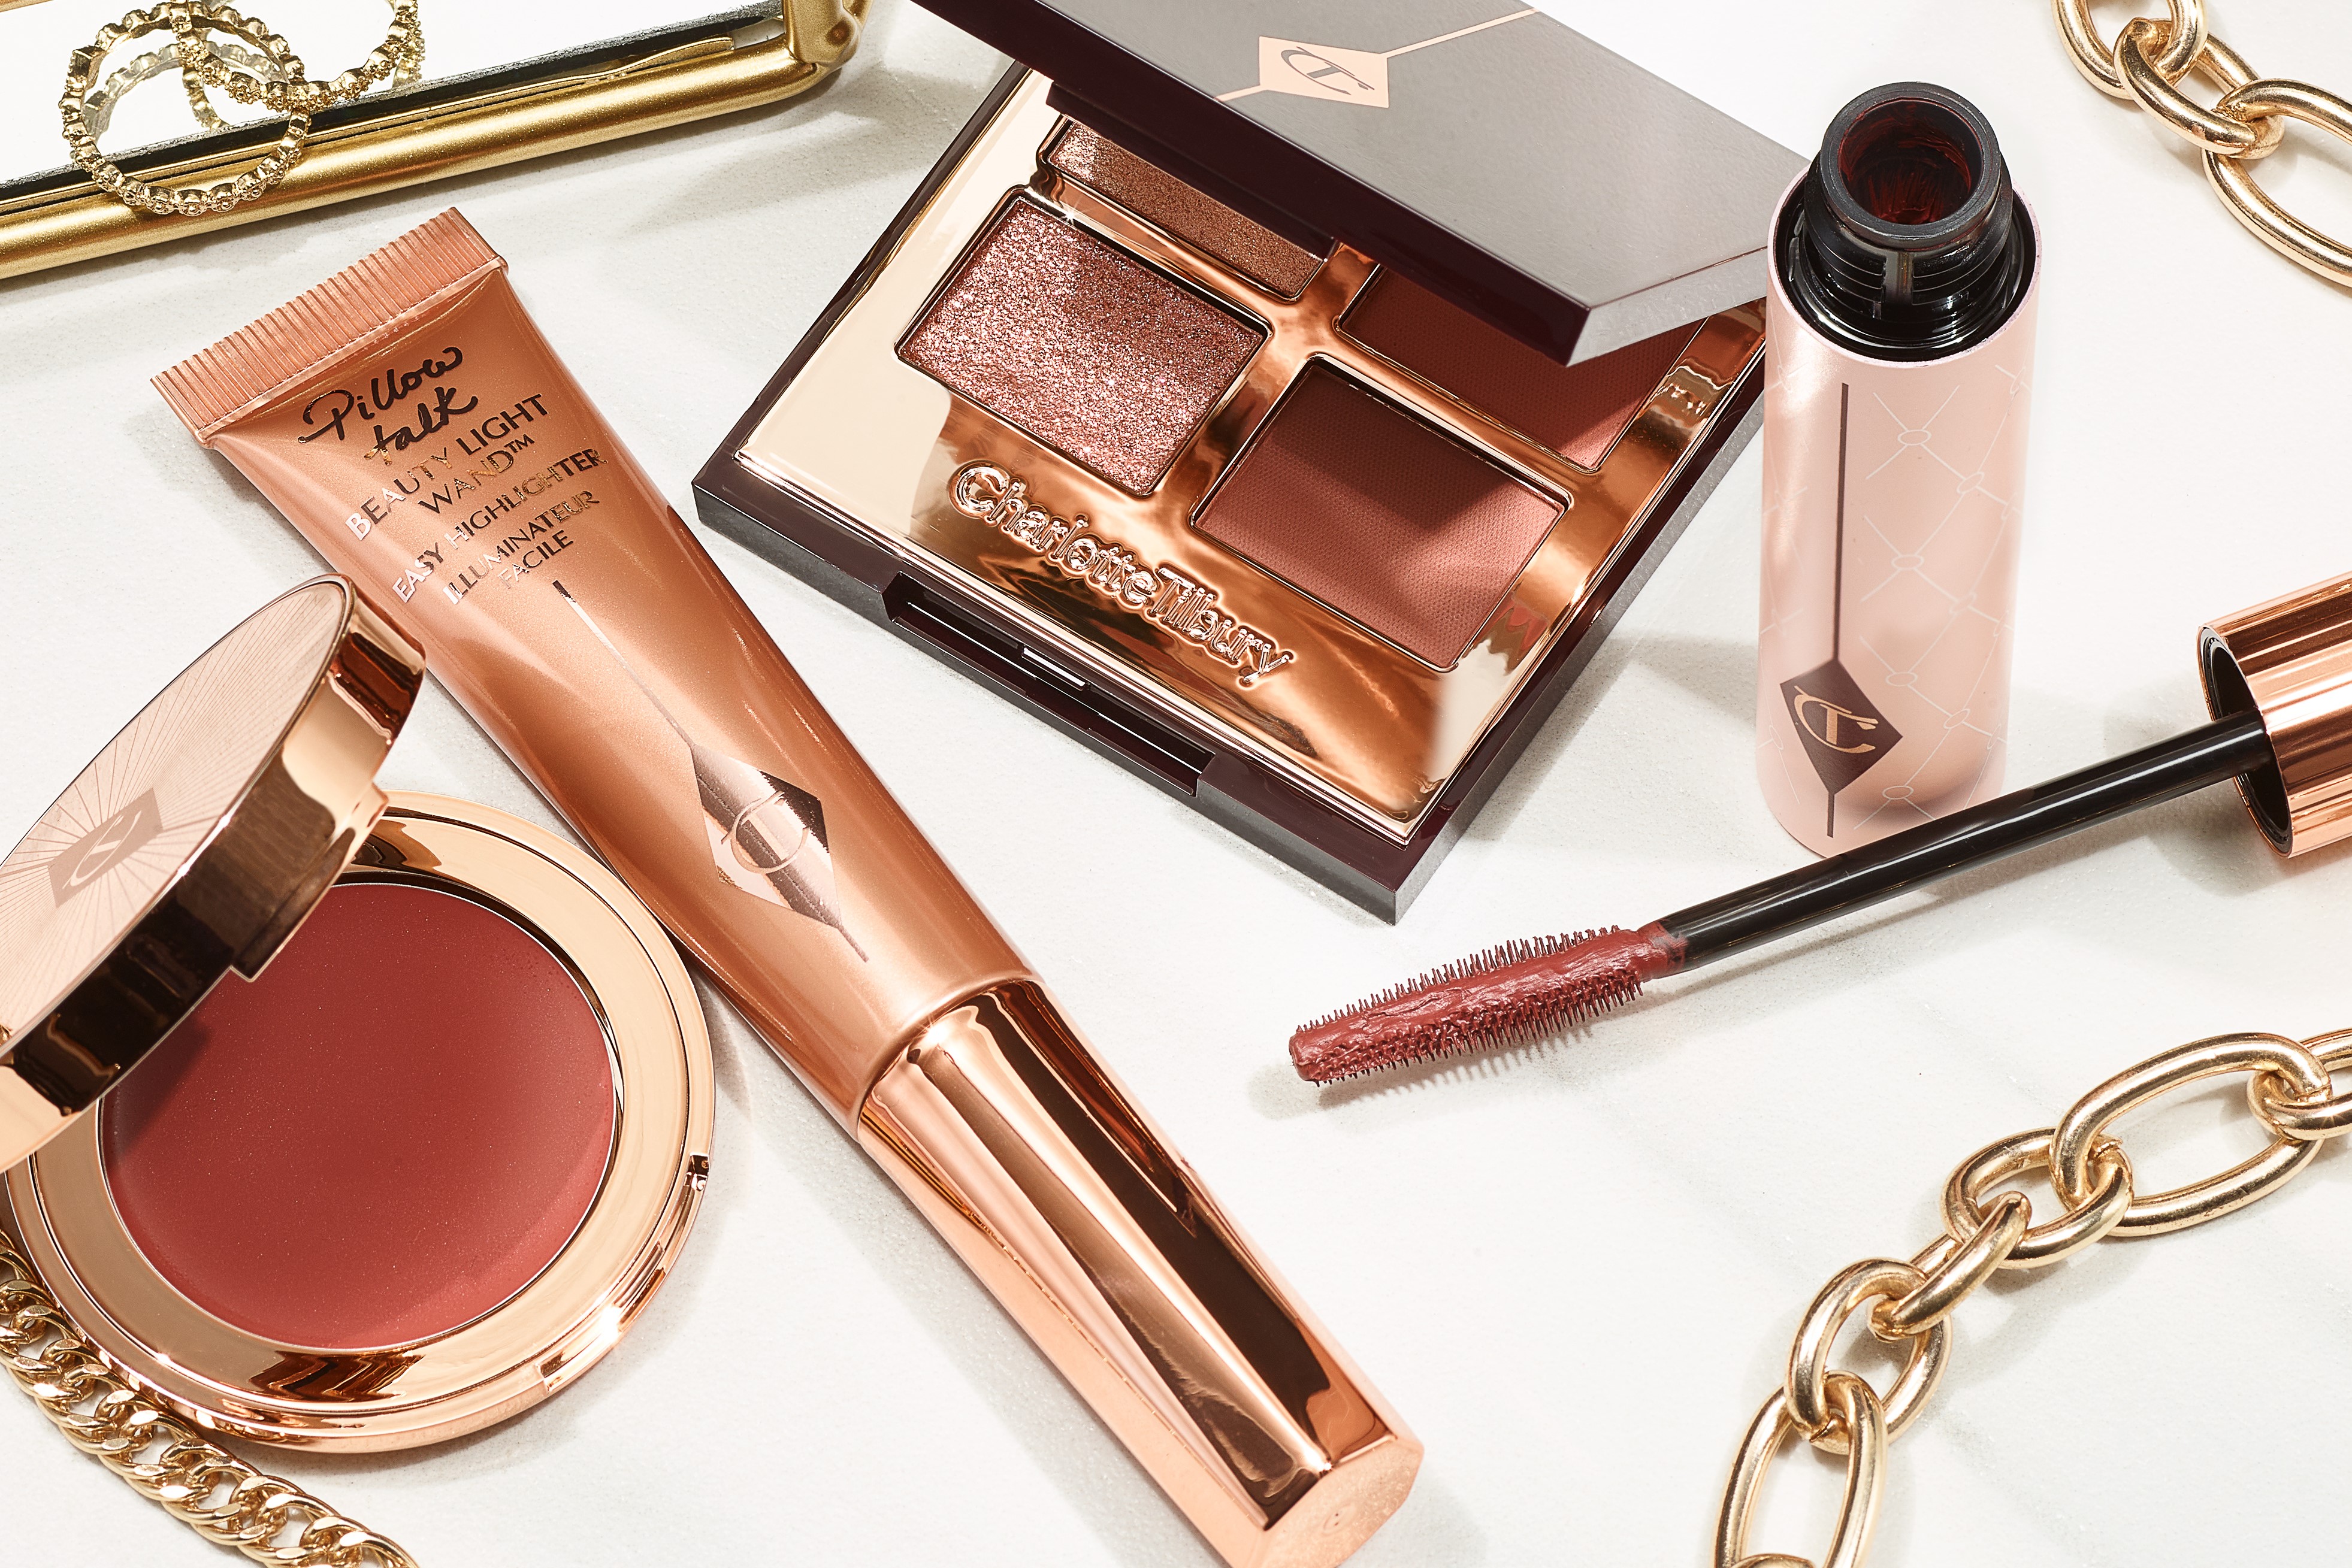 5 Charlotte Tilbury Pillow Talk Buys That Work For Everyone